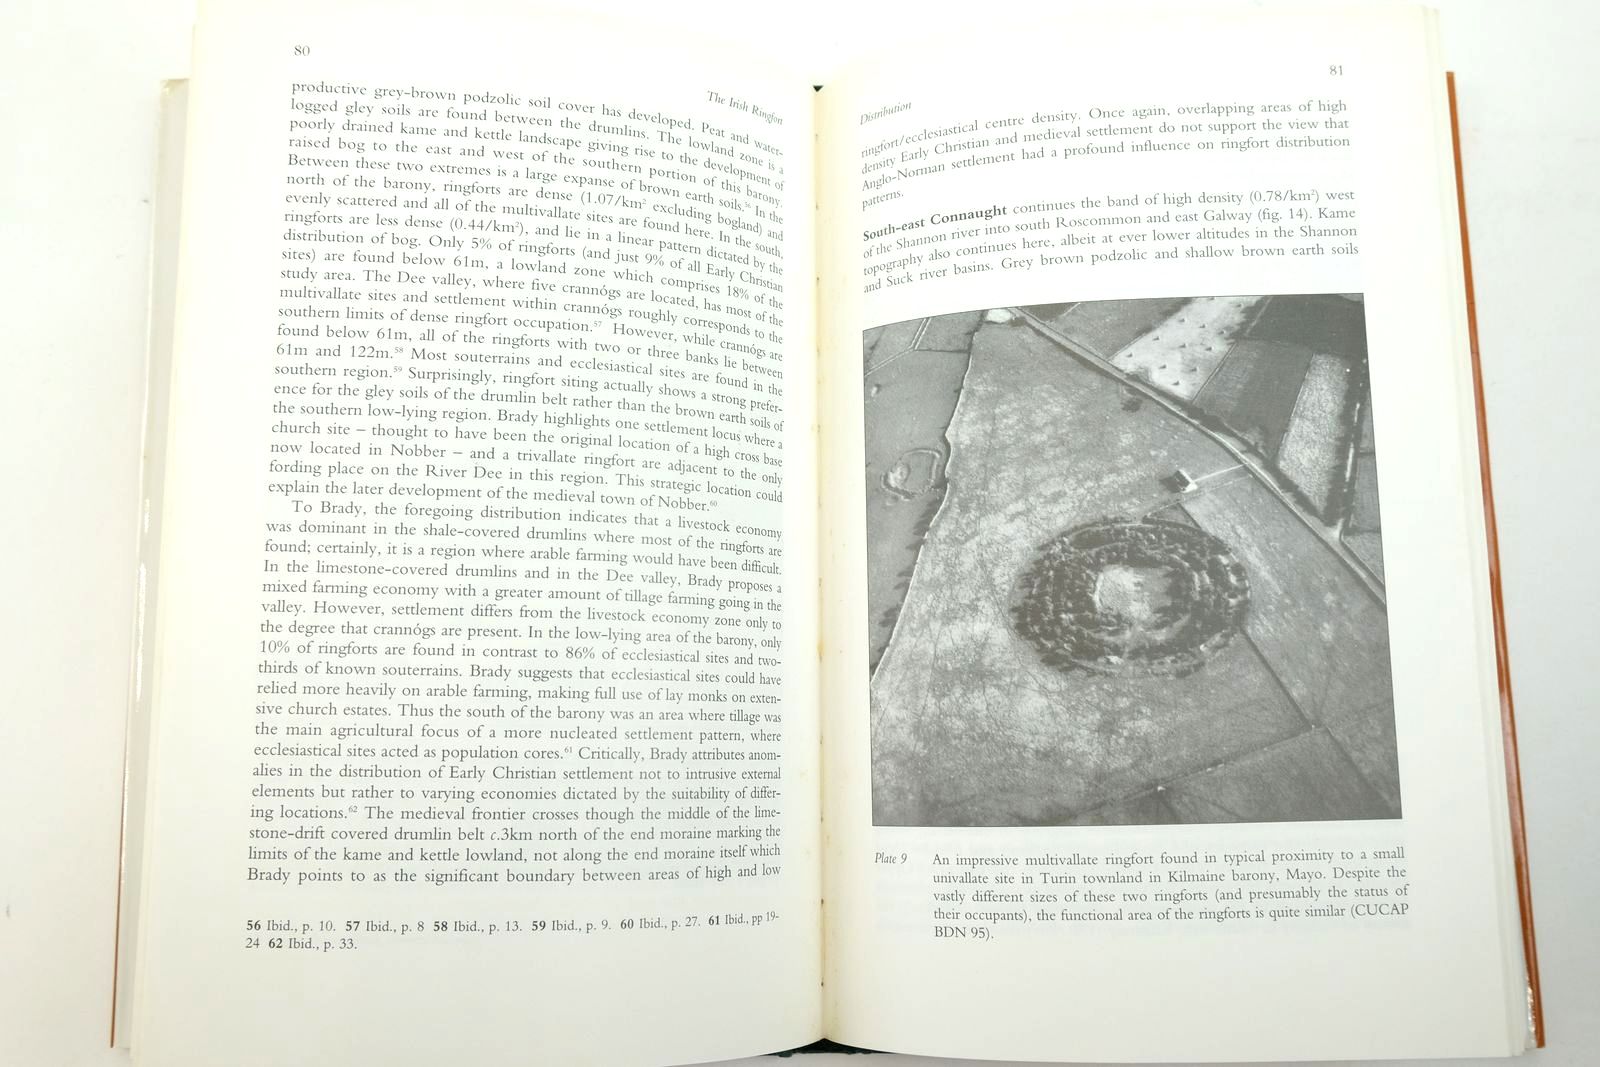 Photo of THE IRISH RINGFORT written by Stout, Matthew published by Four Courts Press (STOCK CODE: 2140676)  for sale by Stella & Rose's Books